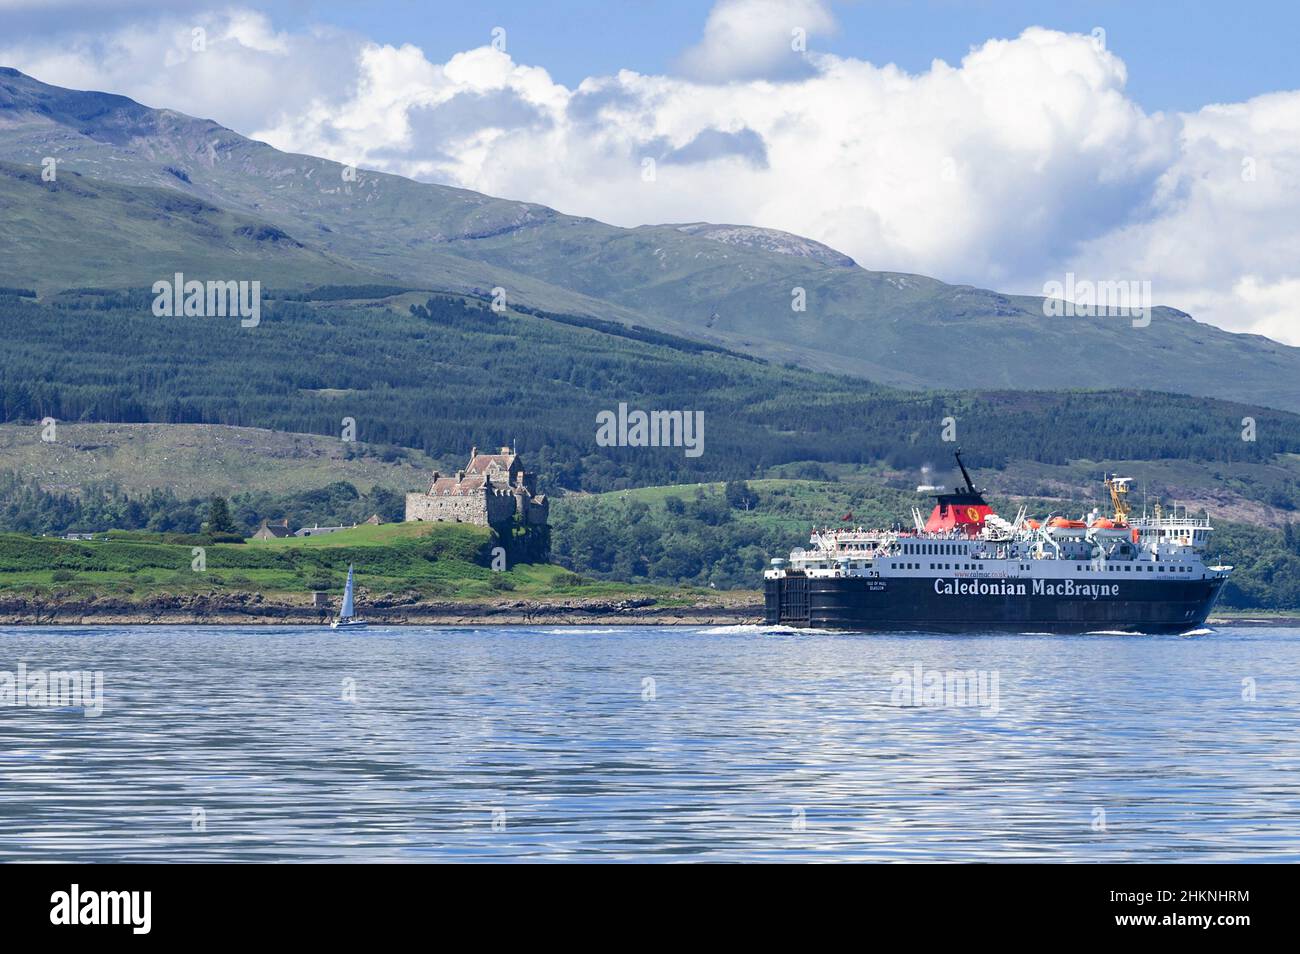 Duart Castle the 13th century castle and seat of Clan MacLean on a headland in the Sound of Mull and Loch Linnhe,Isle of Mull,Inner Hebridies,Scotland Stock Photo